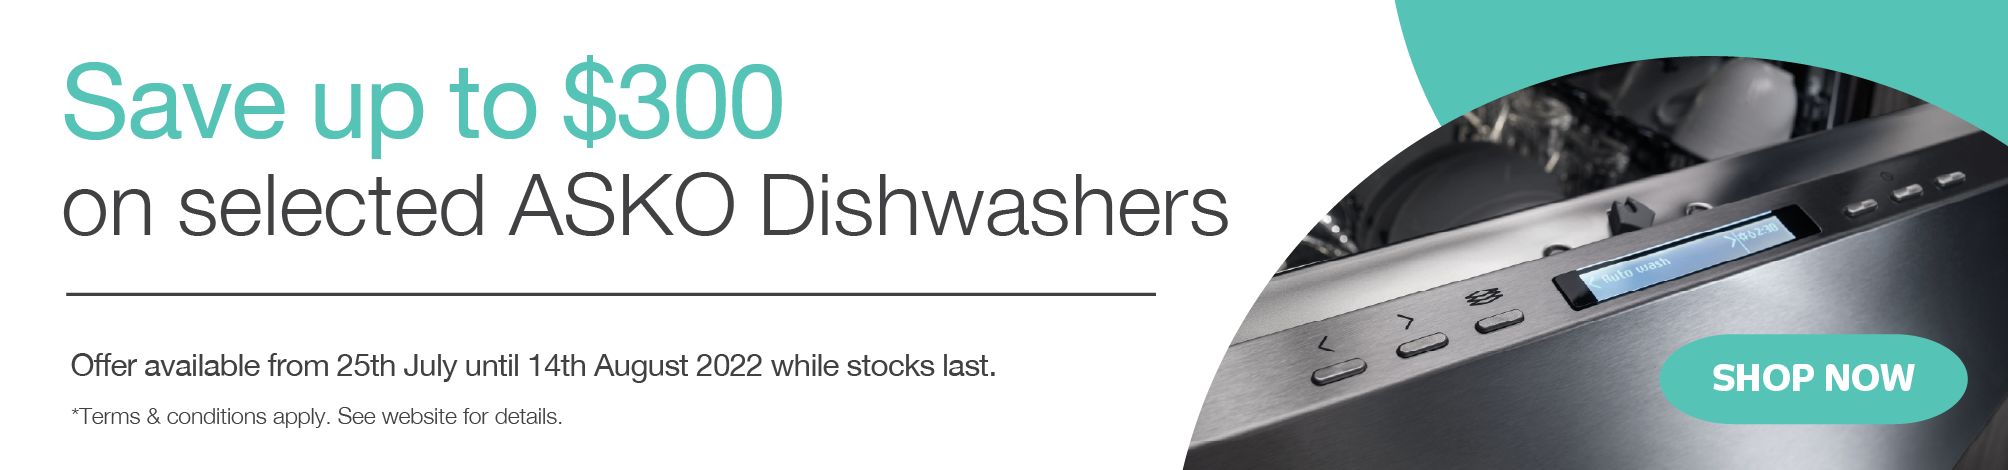 Save Up To $300 On Selected ASKO Dishwashers